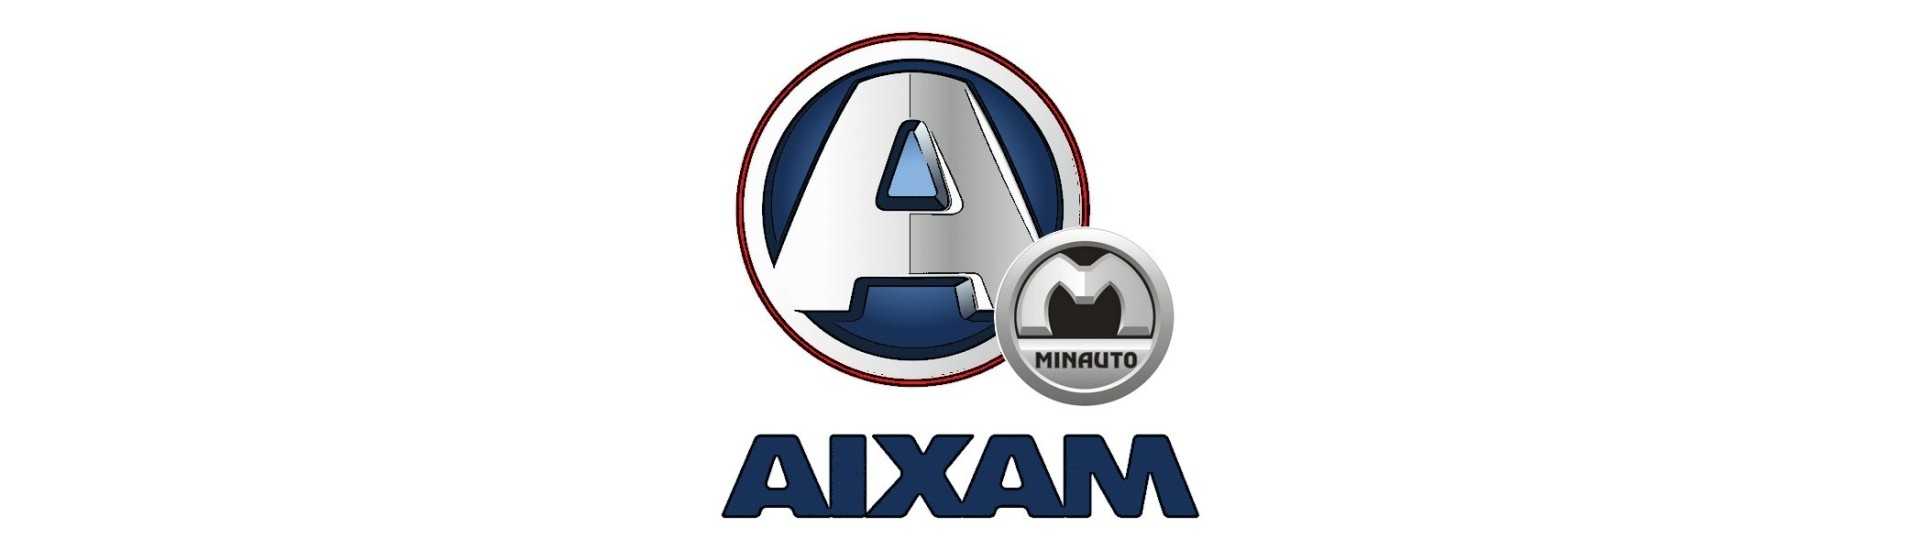 Service book at best price car without a permit Aixam Minauto